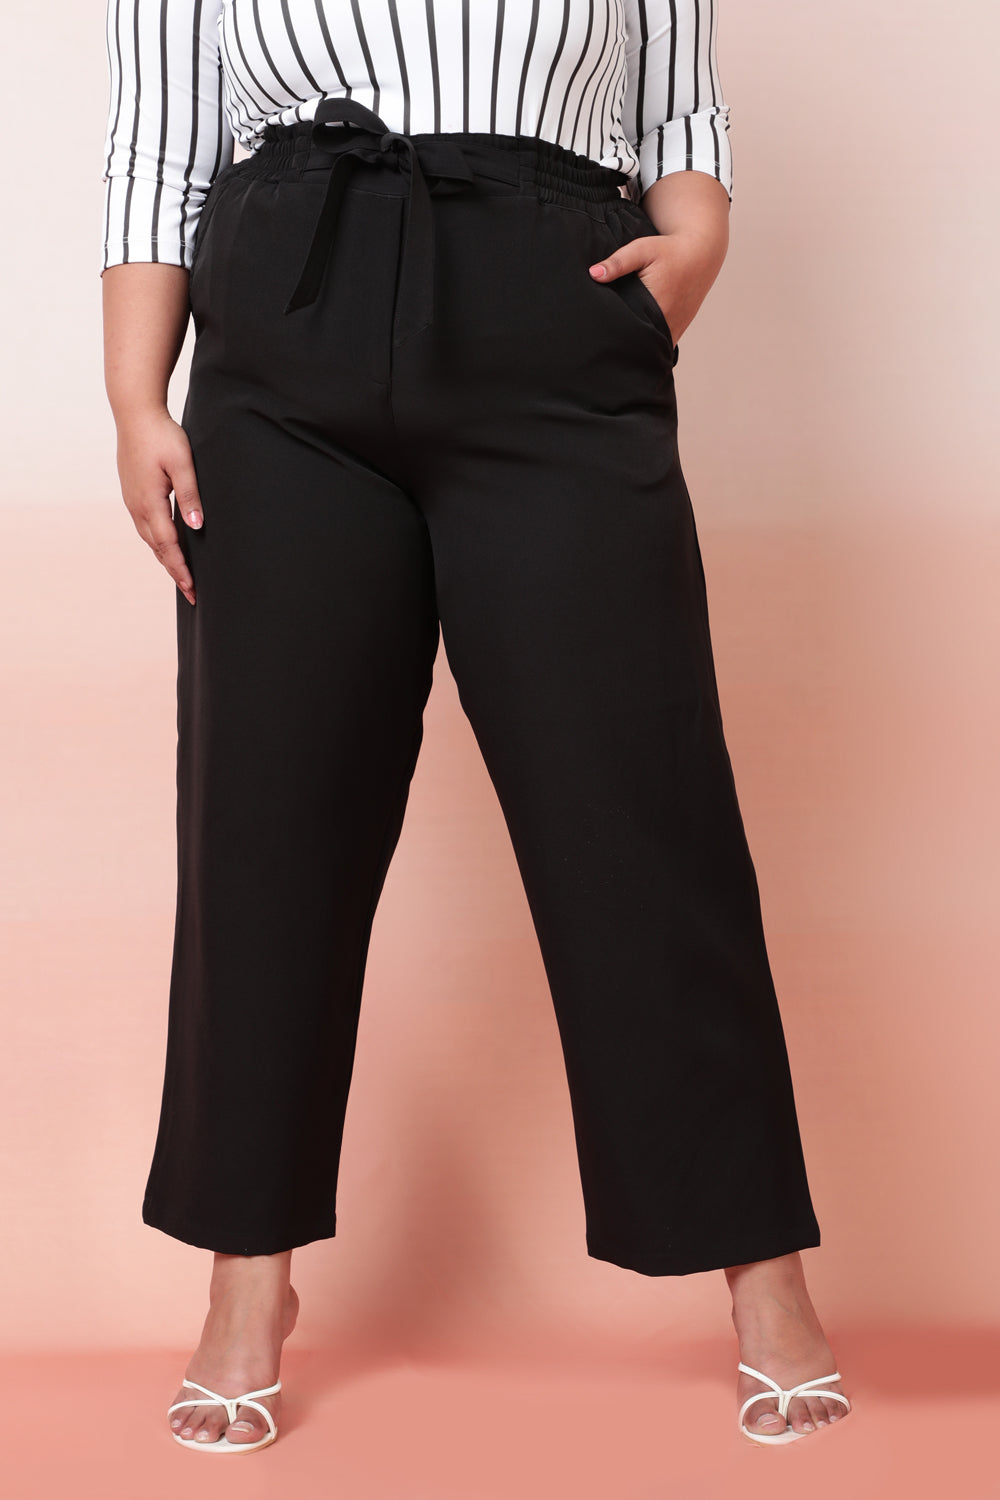 Buy Comfortable High Waisted Pants For Women Online